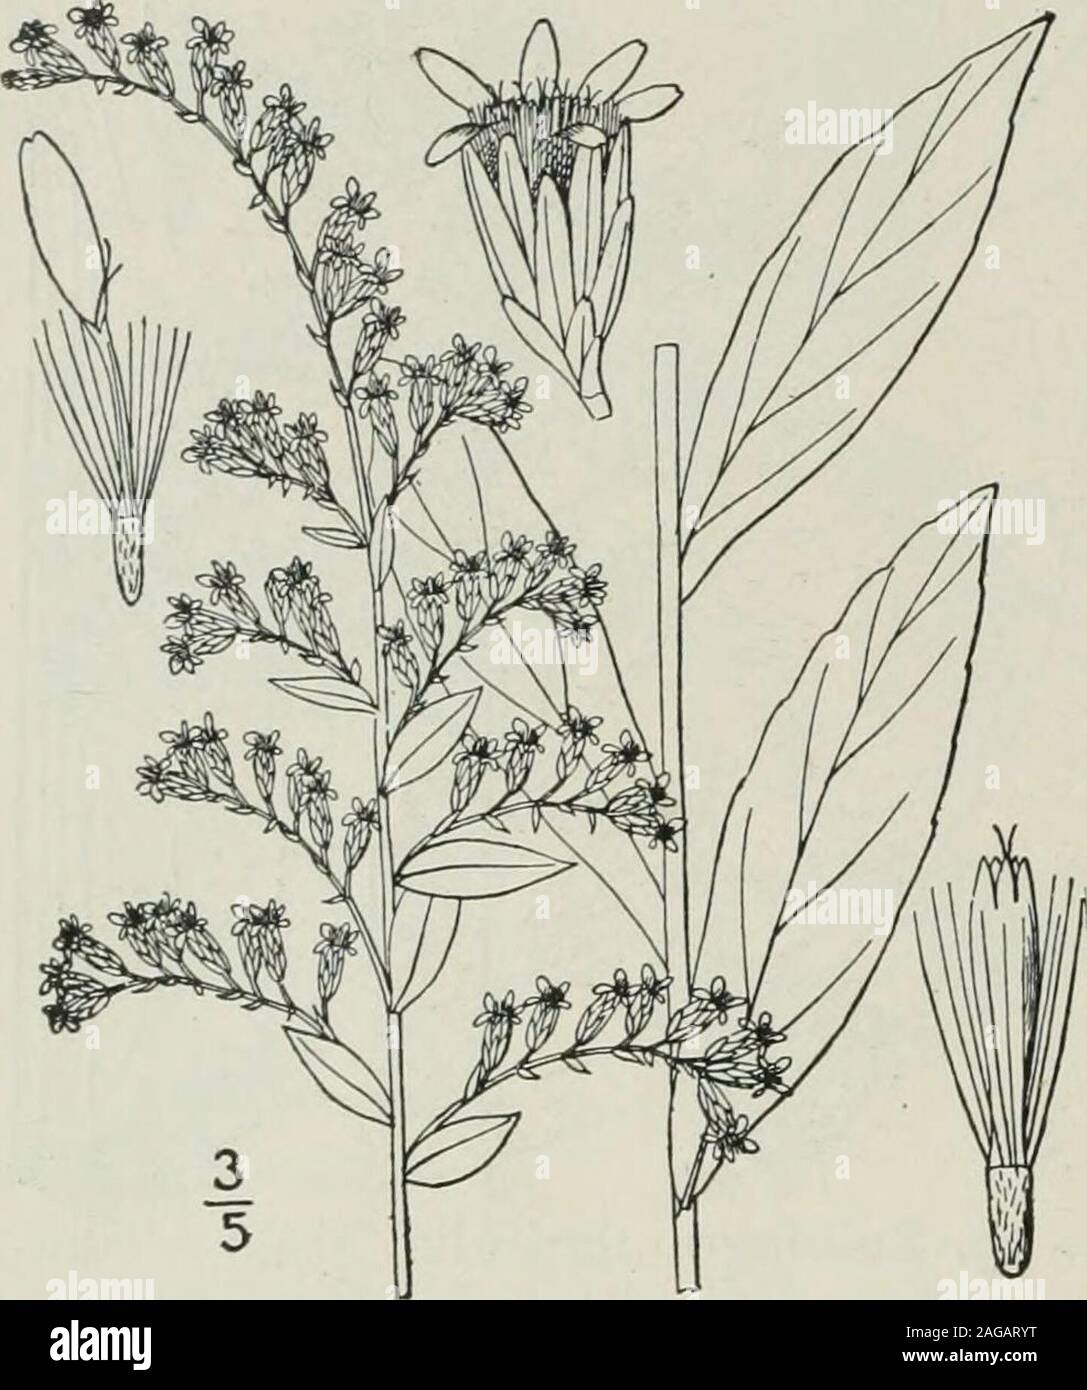 . An illustrated flora of the northern United States, Canada and the British possessions : from Newfoundland to the parallel of the southern boundary of Virginia and from the Atlantic Ocean westward to the 102nd meridian. o9 COMPOSITAE. Vol. III.. 31. Solidago Elliottii T. & G. Elliotts Golden-rod. Fig. 4243. Solidago Elliottii T. & G. Fl. N. A. 2: 218. 1841.Solidago elliptica Ell. Bot. S. C. & Ga. 2: 376.1824. Not Ait. 1789. Stem glabrous, or minutely puberulentabove, stout, 3°-6° high, simple, or branchedat the inflorescence. Leaves firm, oblong oroblong-lanceolate, rarely ovate-oblong, acut Stock Photo